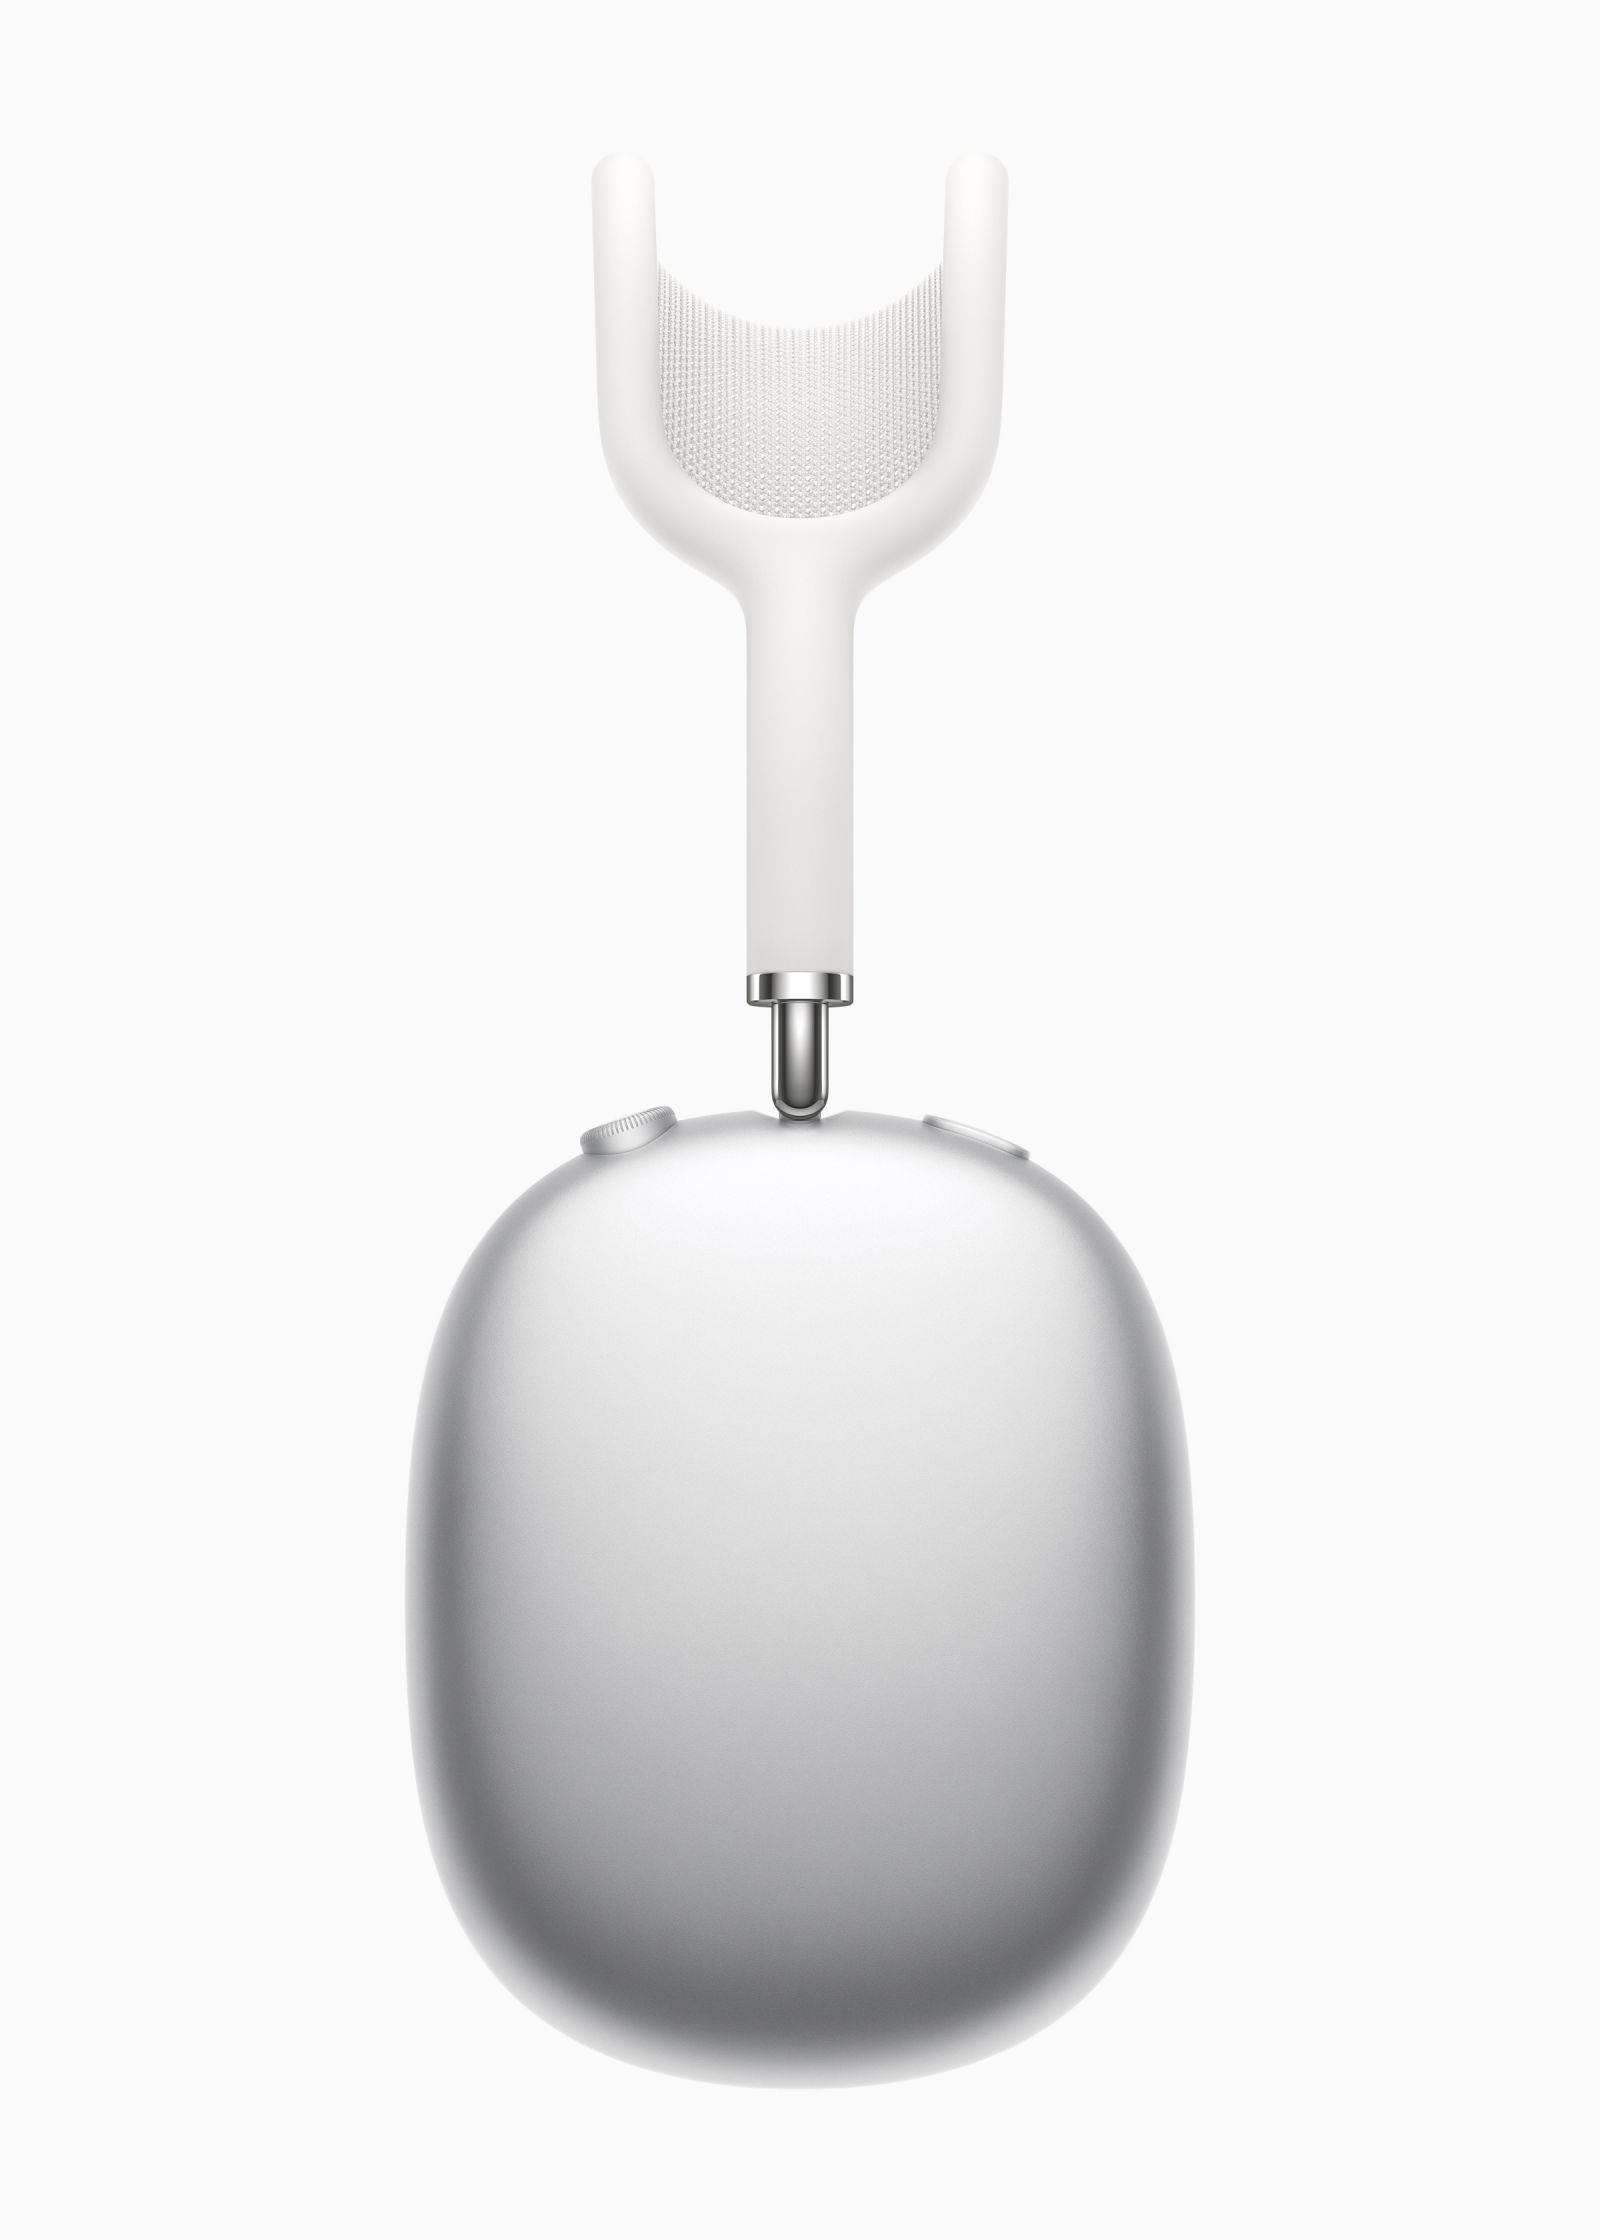 apple_airpods-max_color-white_12082020.jpg